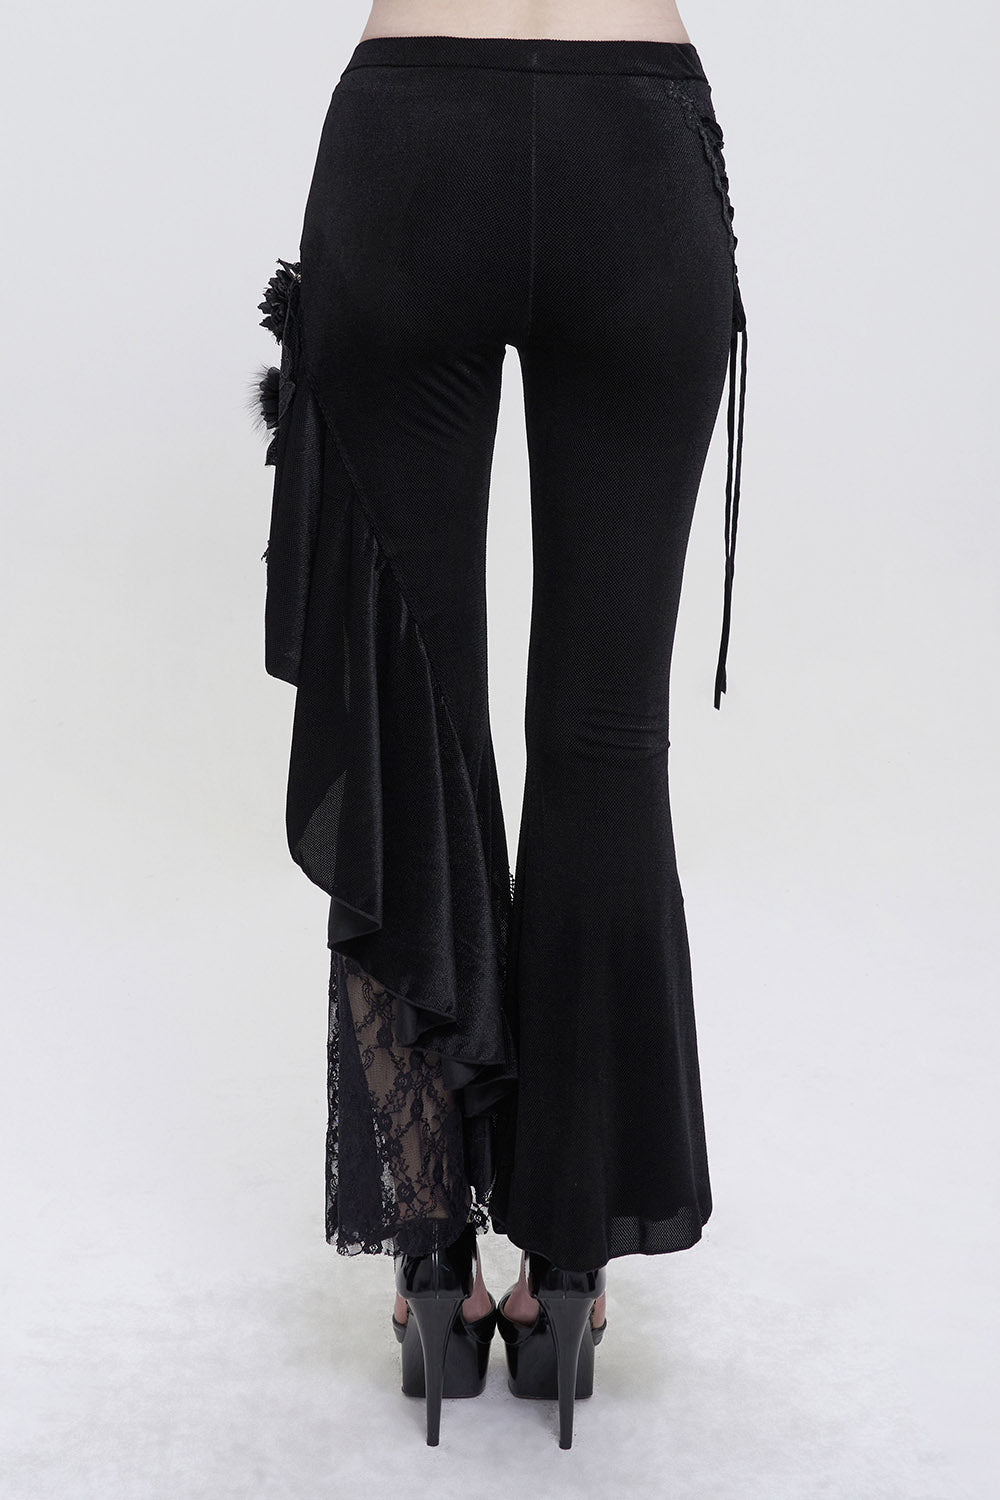 gothic bottoms for women